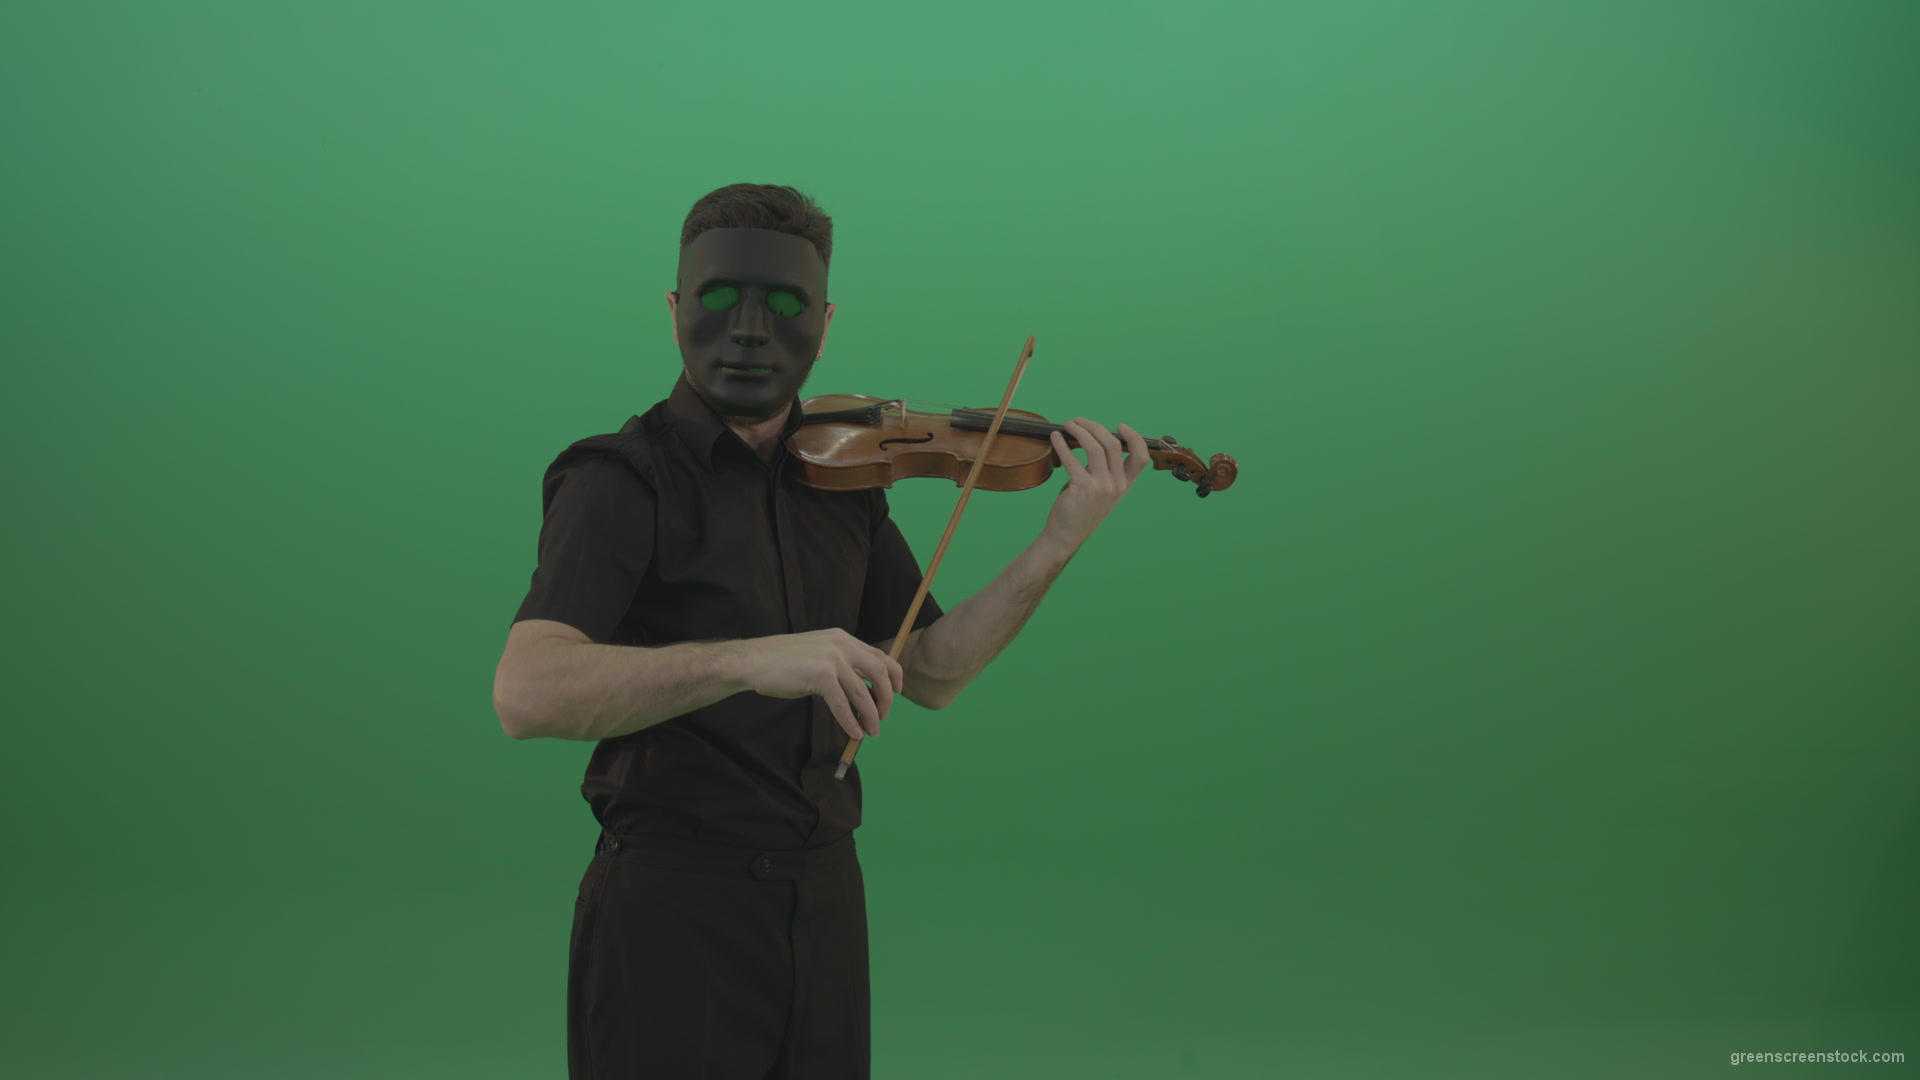 Man-in-black-wear-and-mask-play-violin-fiddle-strings-gothic-dark-music-isolated-on-green-screen_001 Green Screen Stock